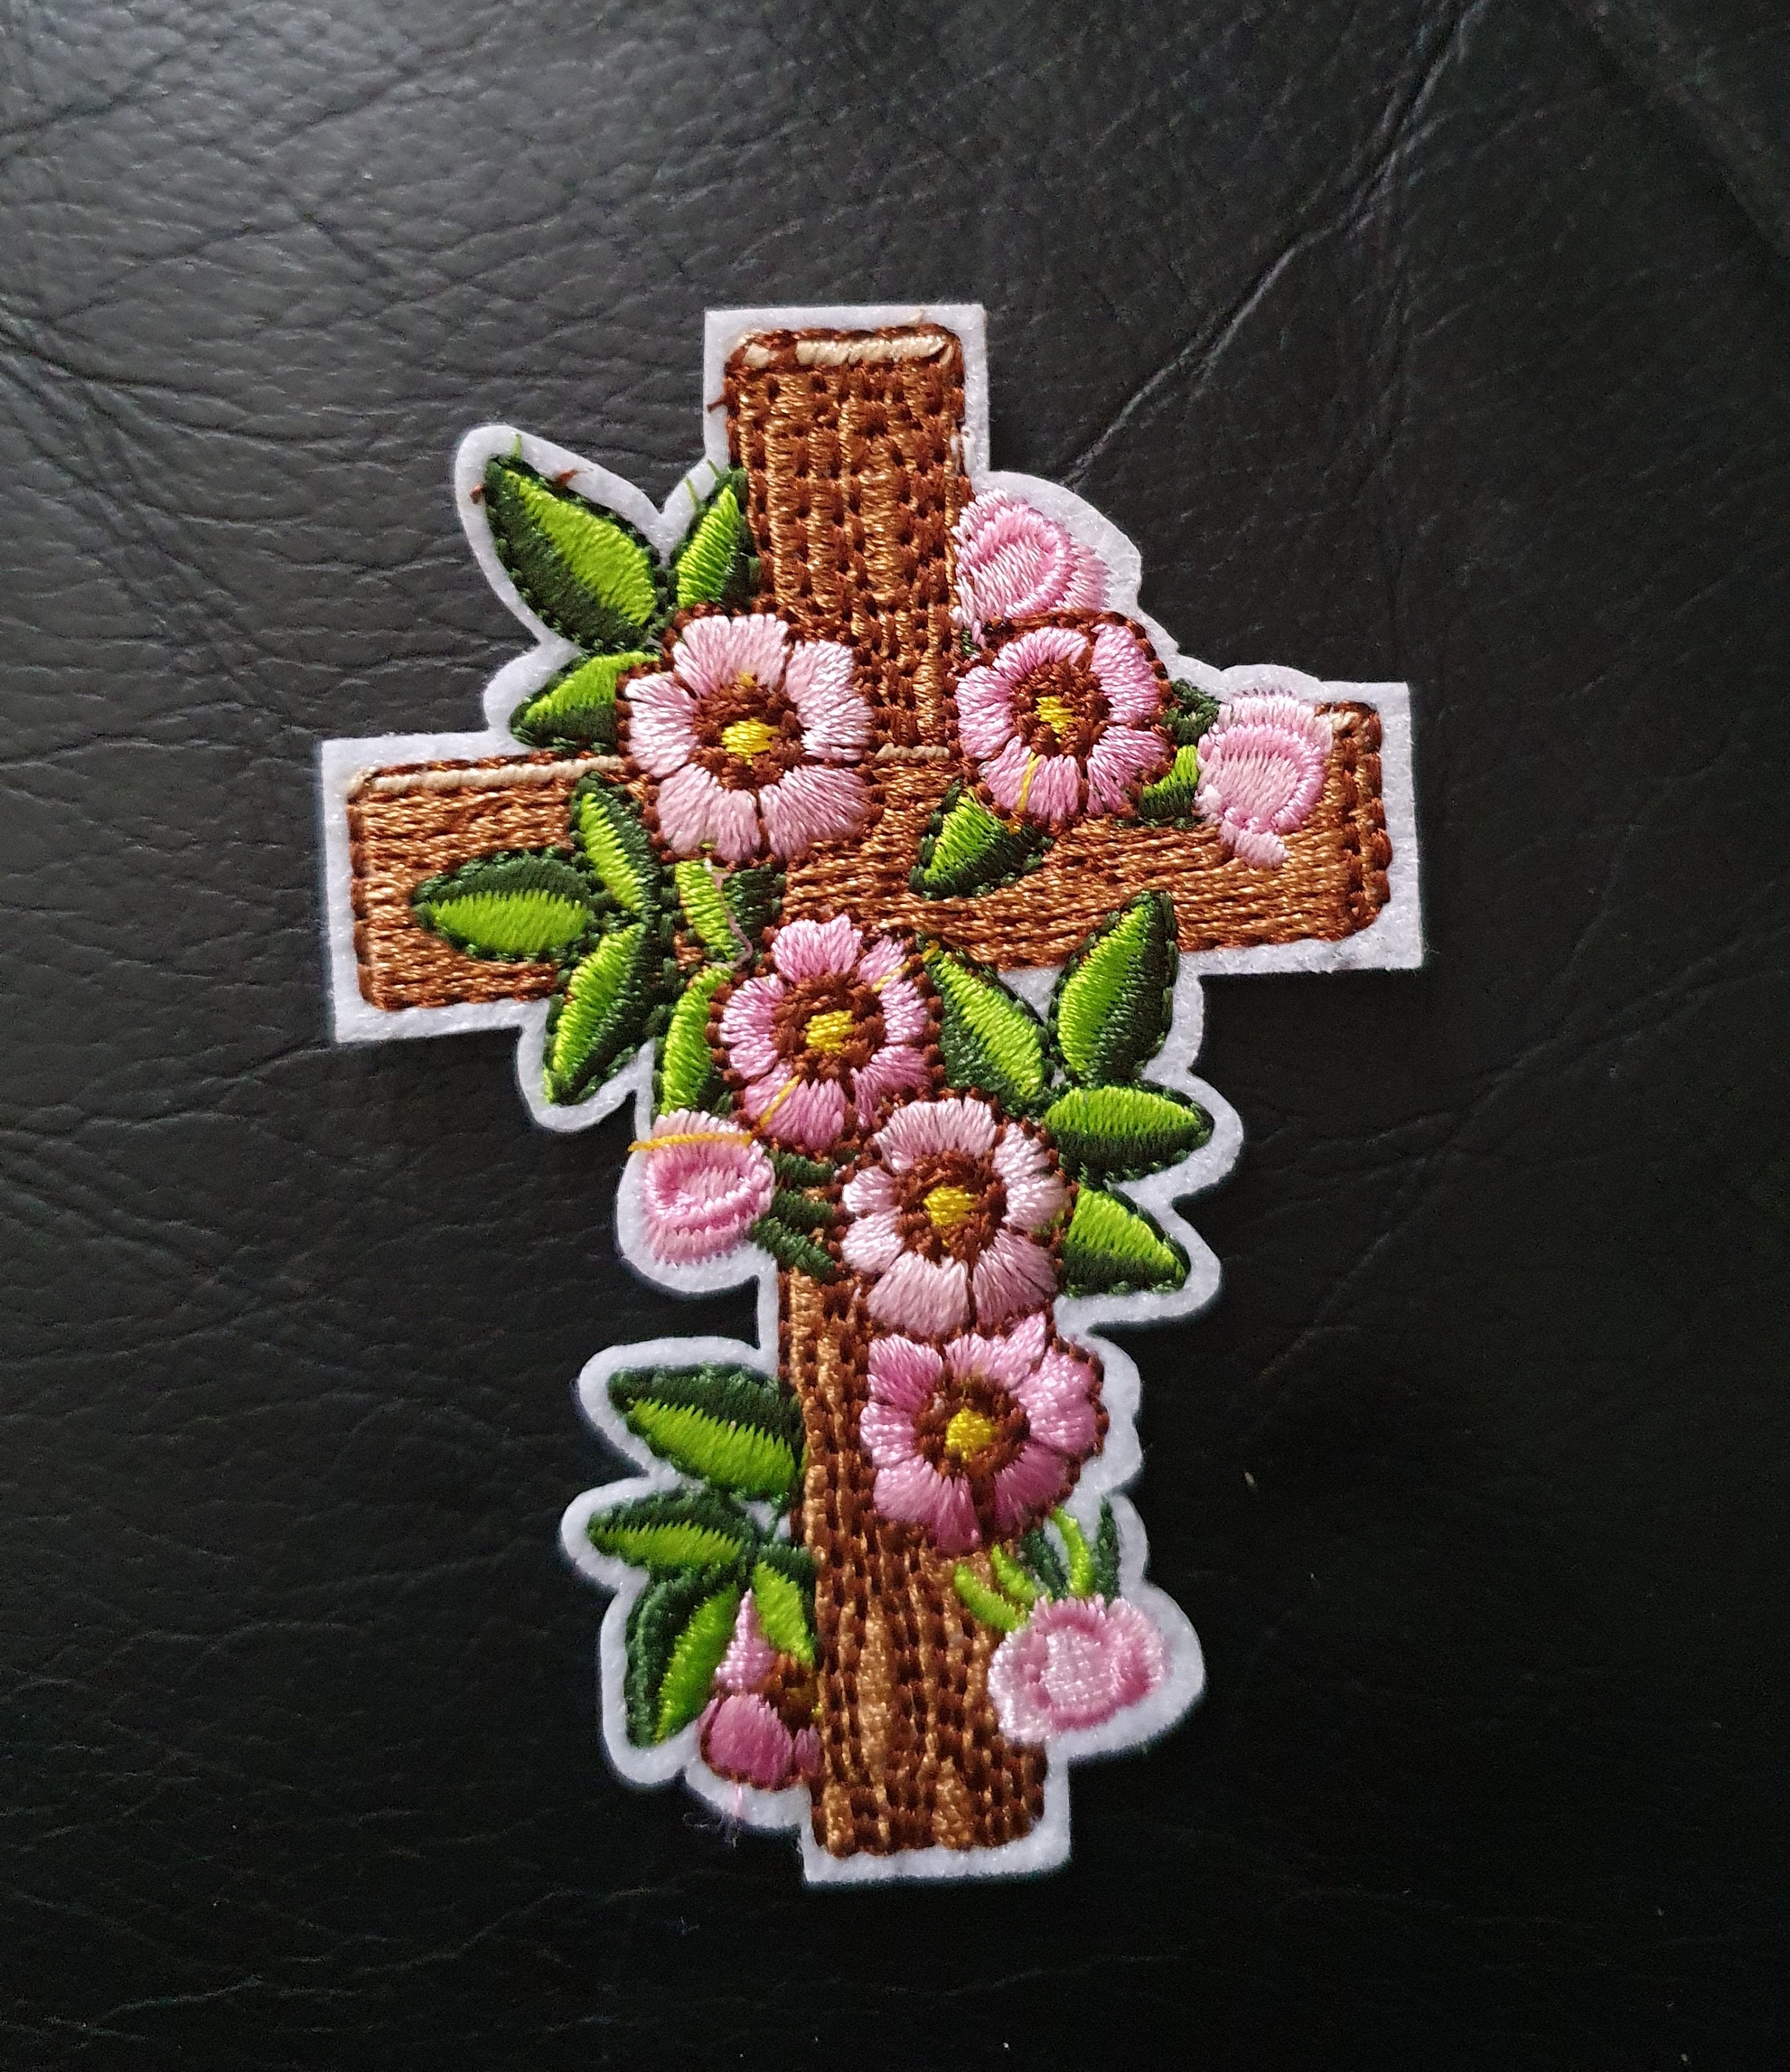 Black White or Red Crucifix Cross Embroidered Patch Applique Very